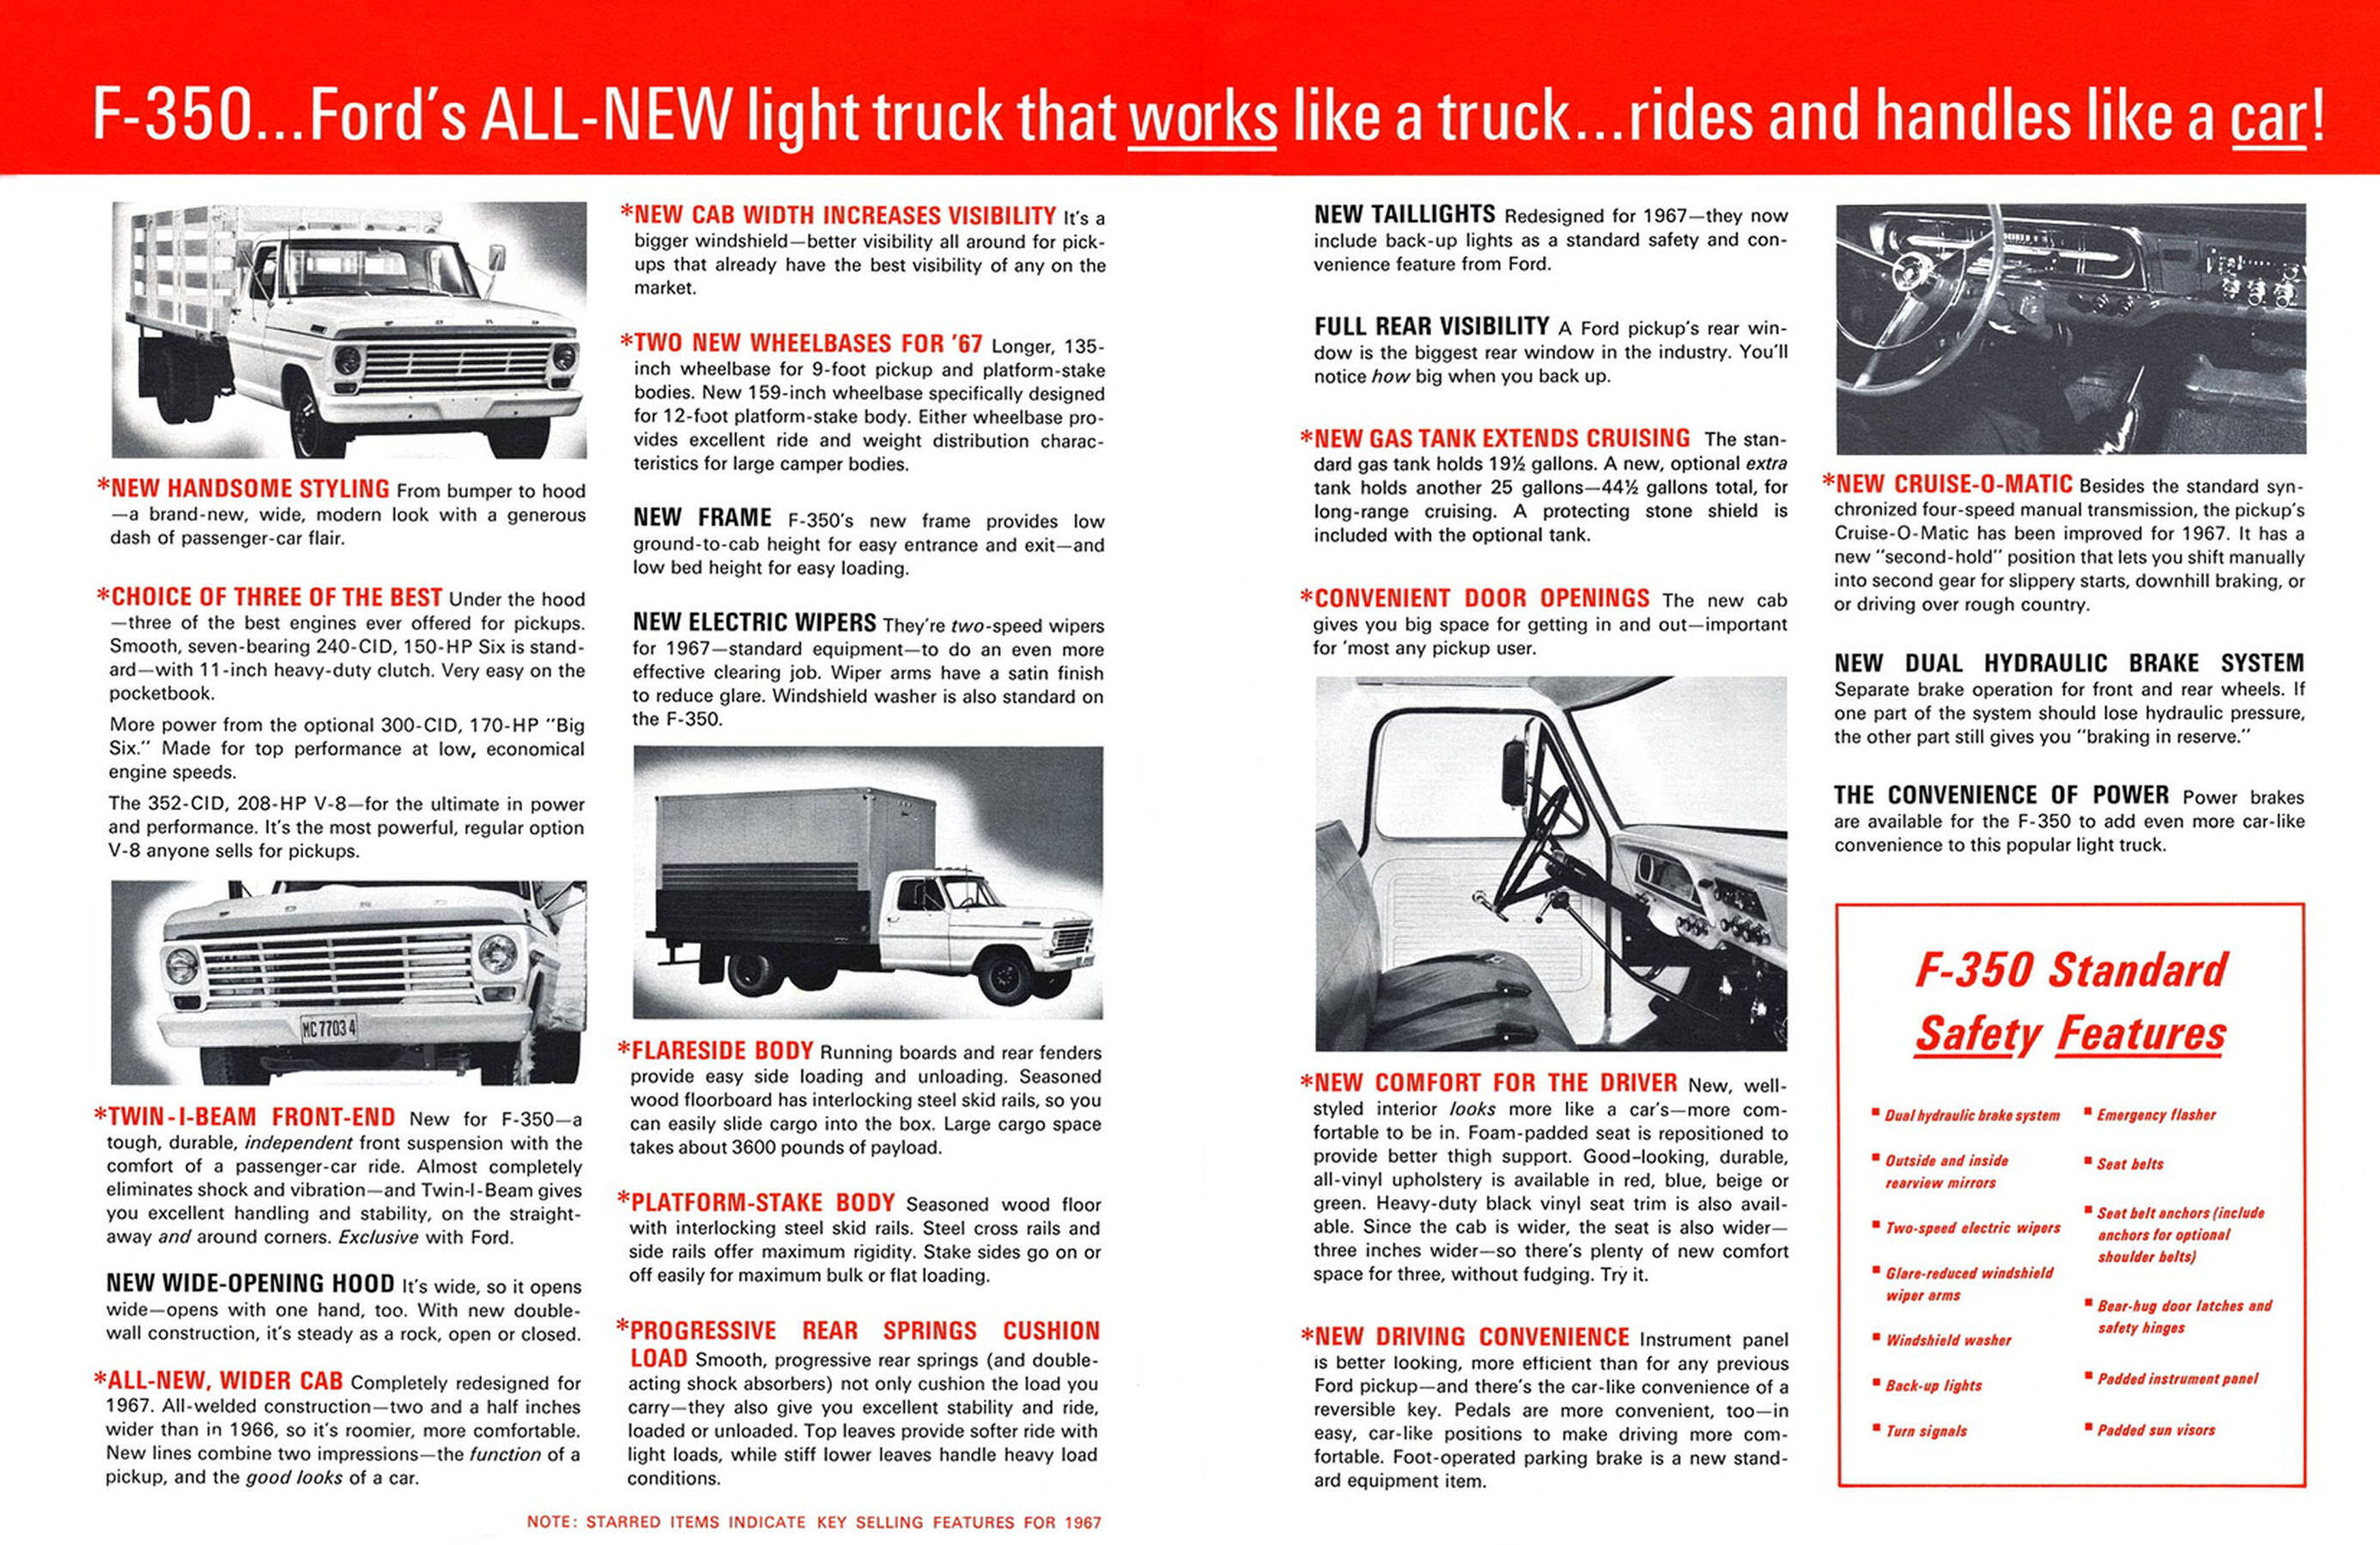 1967 Ford F-350 Sales Features-02-03